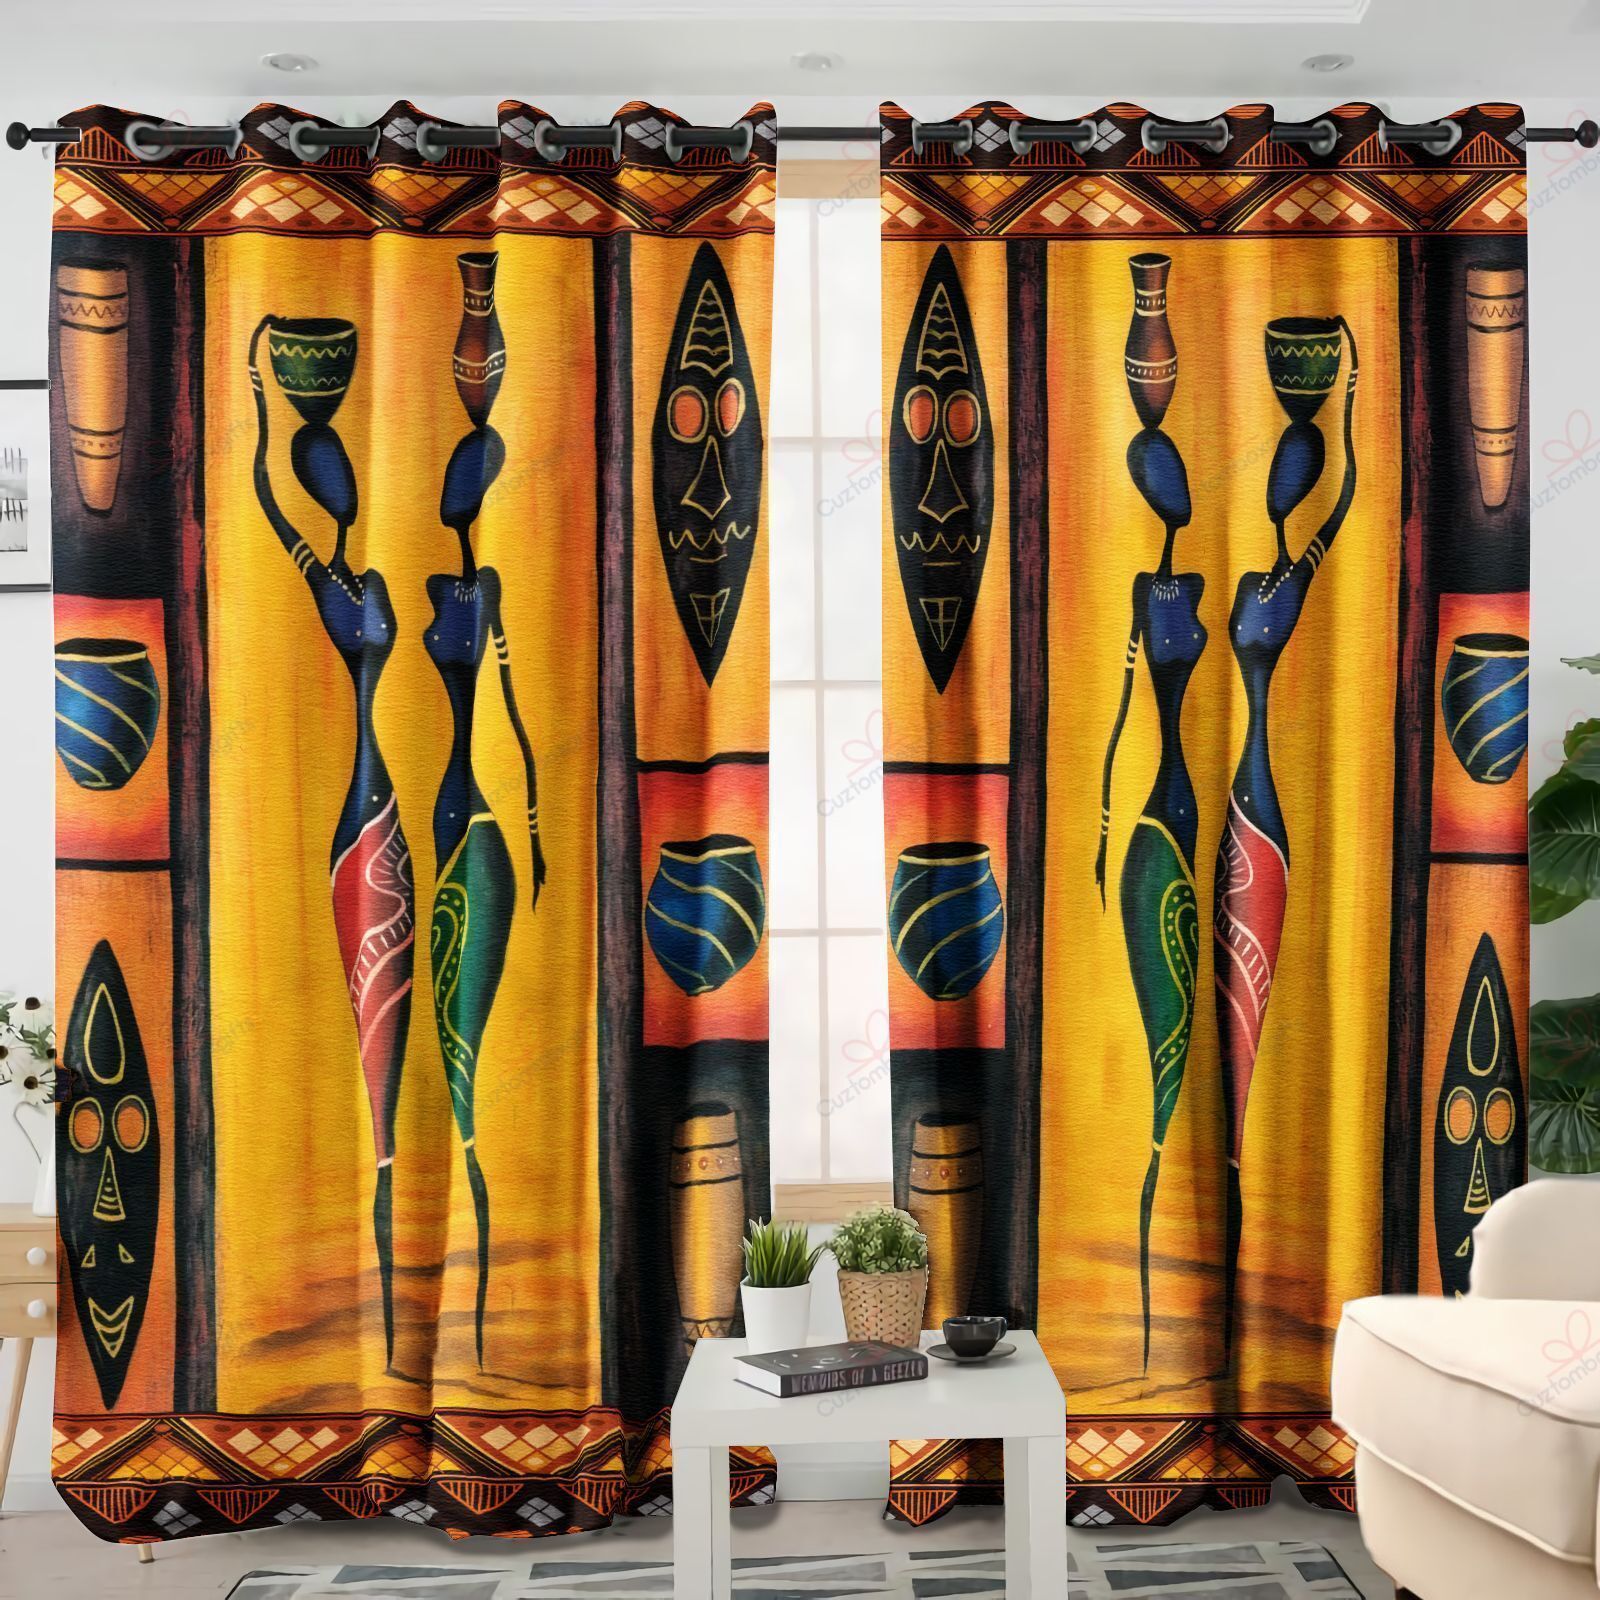 African Culture And Woman Printed Window Curtain Home Decor